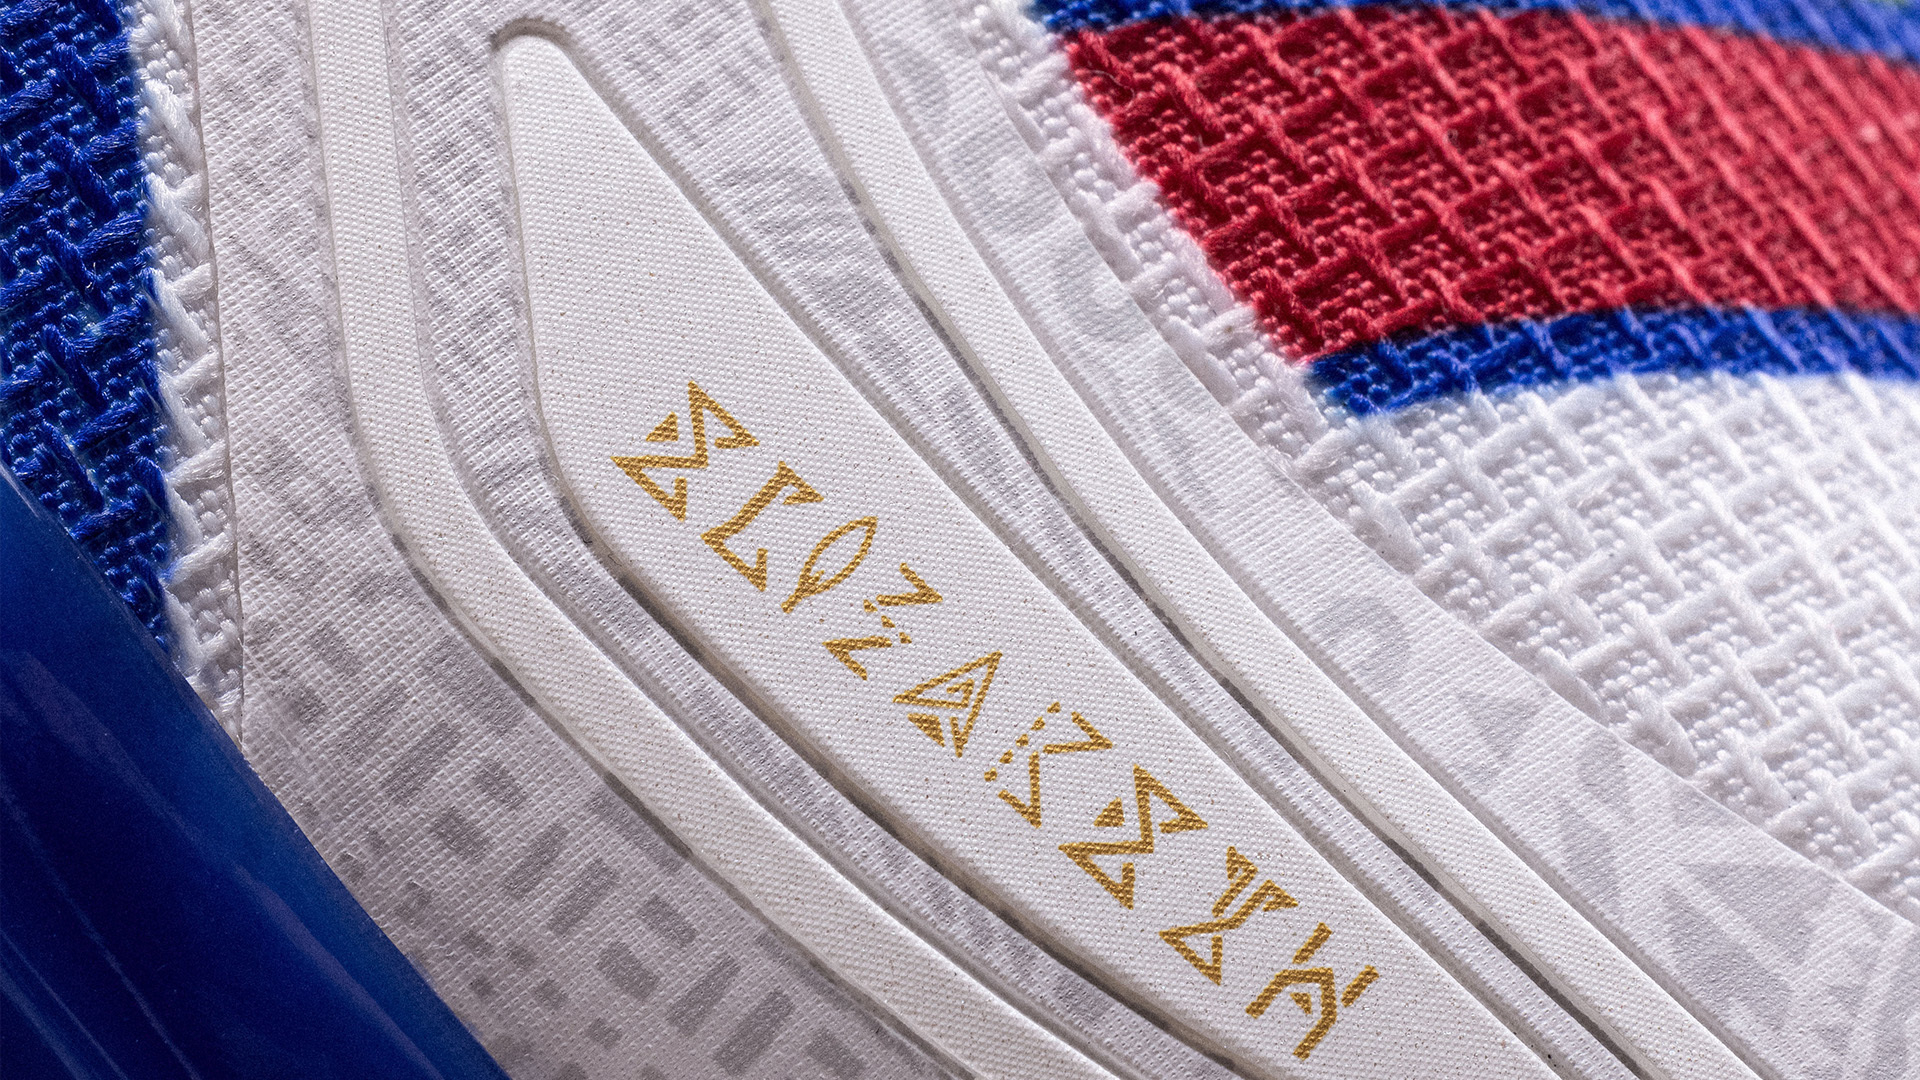 Close-up of a sneaker with textured fabric and embossed symbols on its side